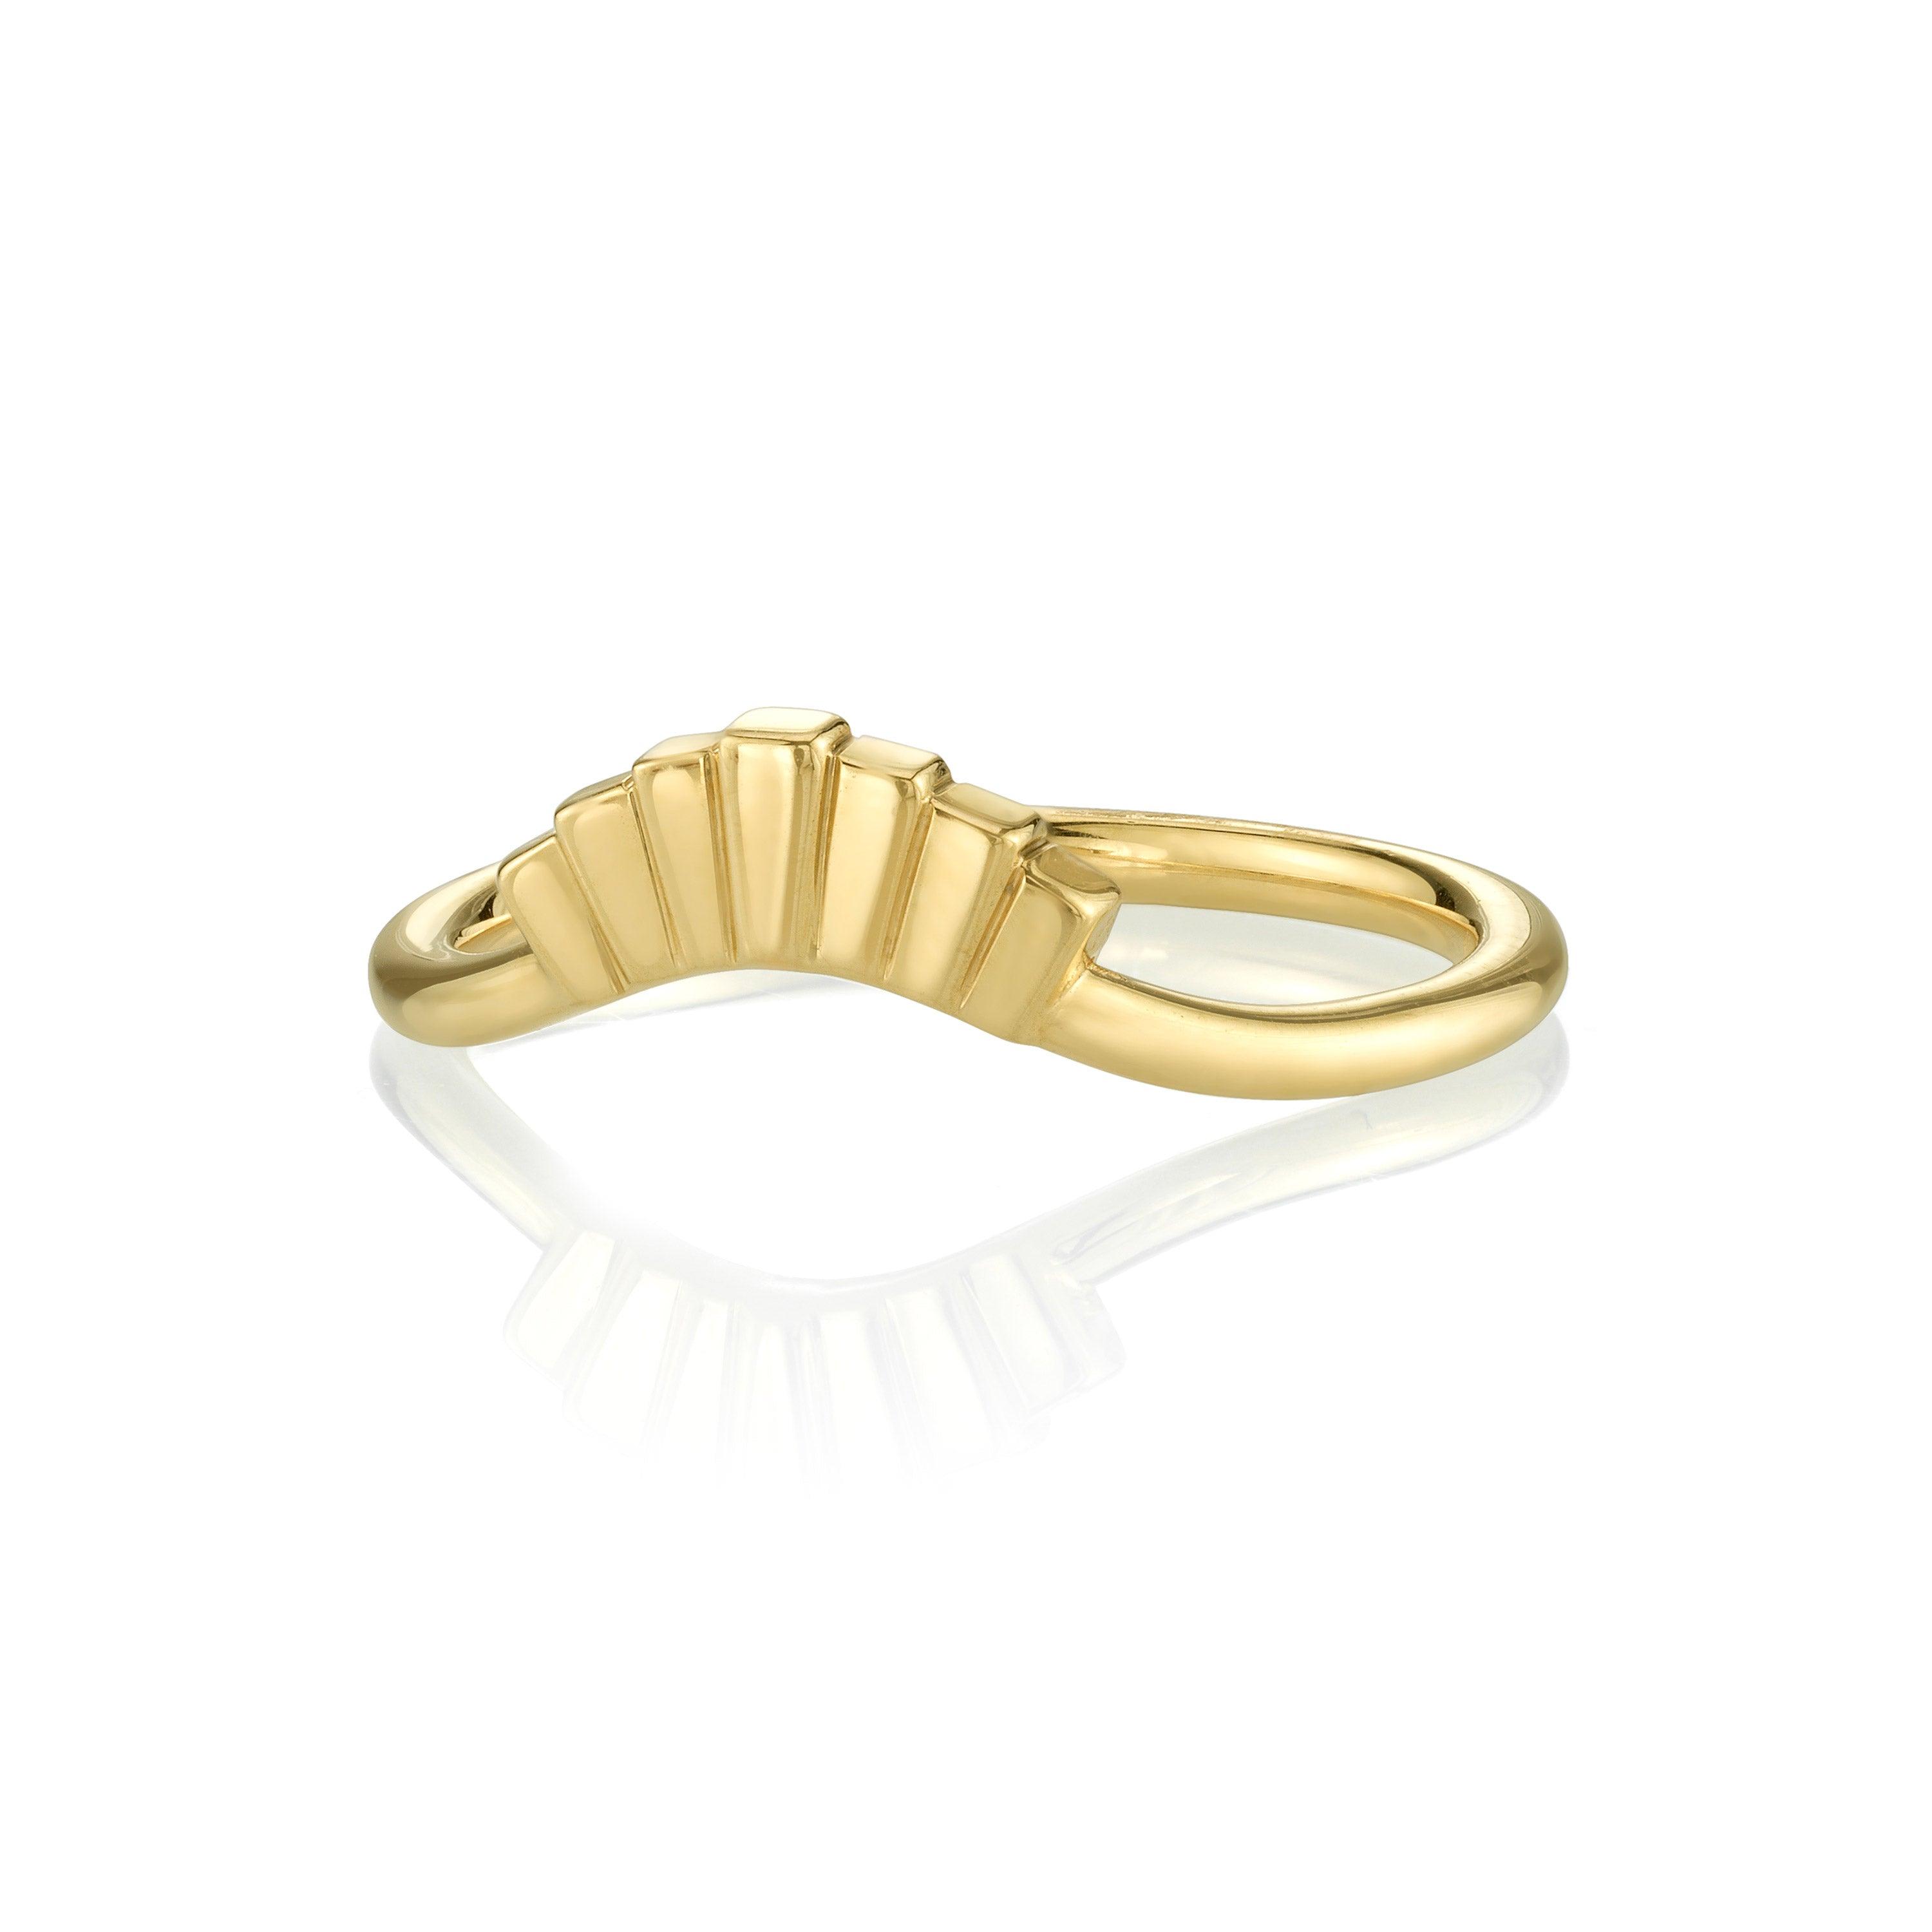 Marrow Fine Jewelry Gold Art Deco Stacking Ring